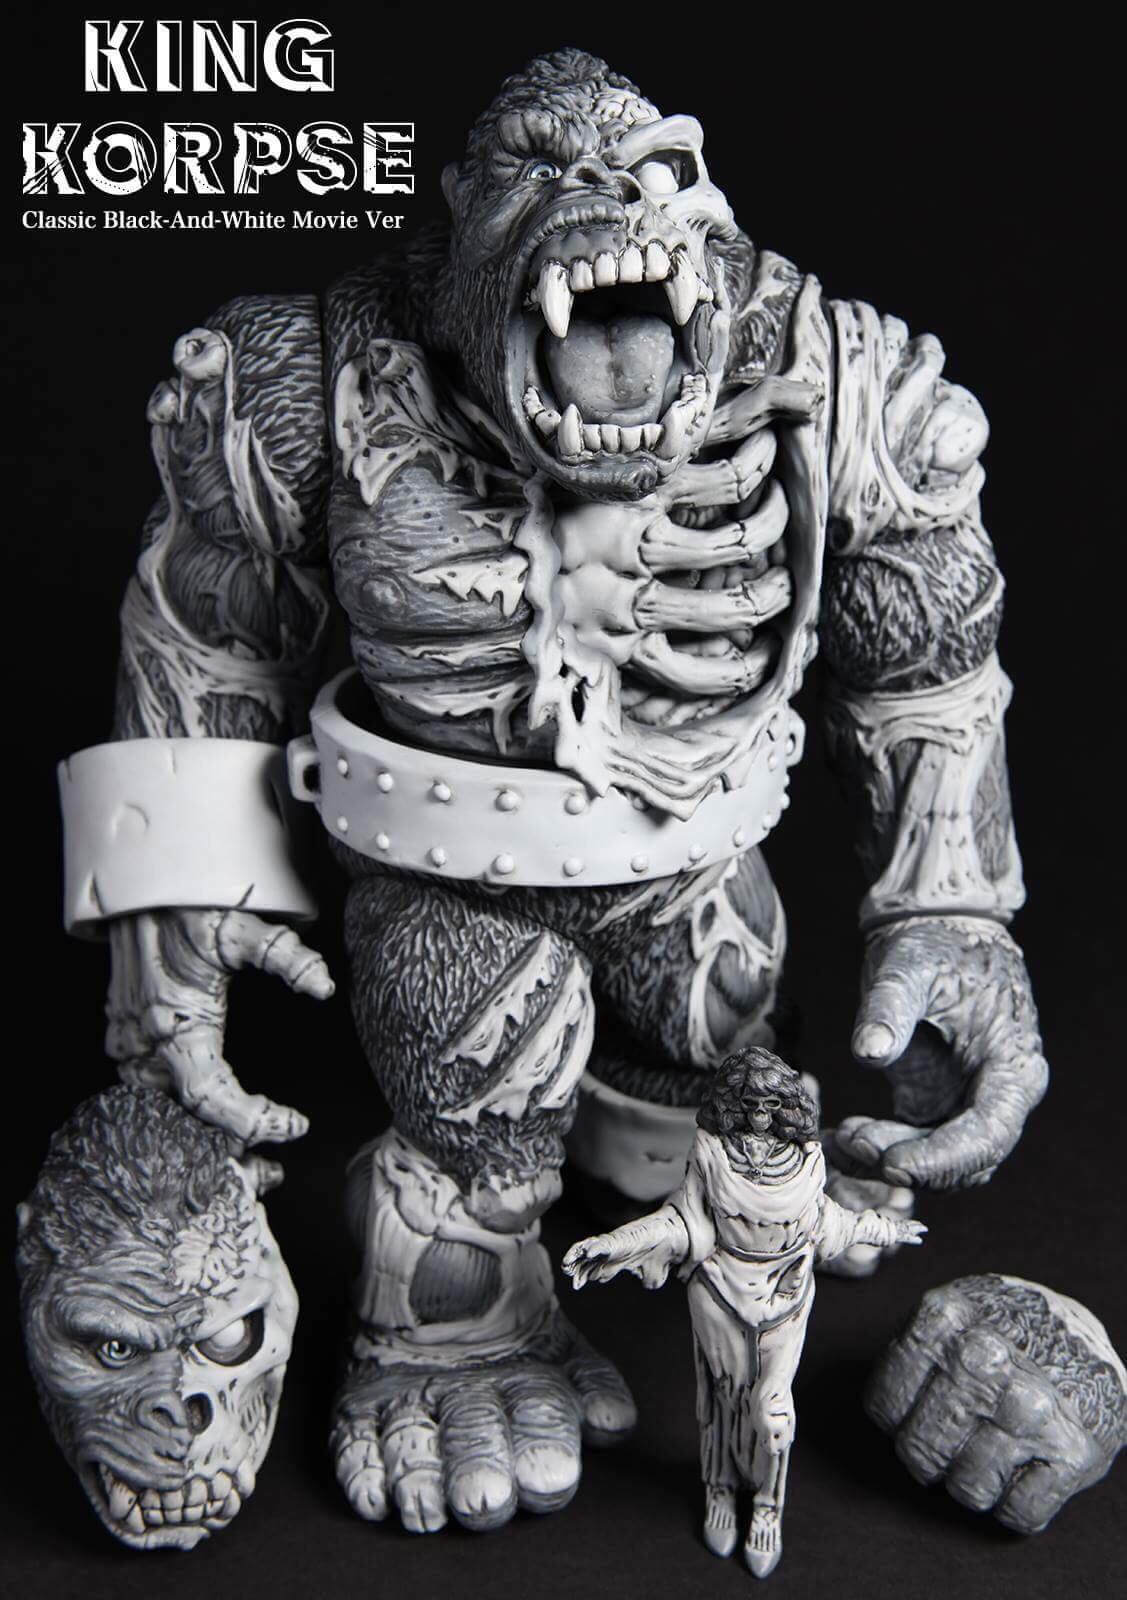 New King Korpse Versions By JAMES GROMAN x INSTINCTOY - The Toy 